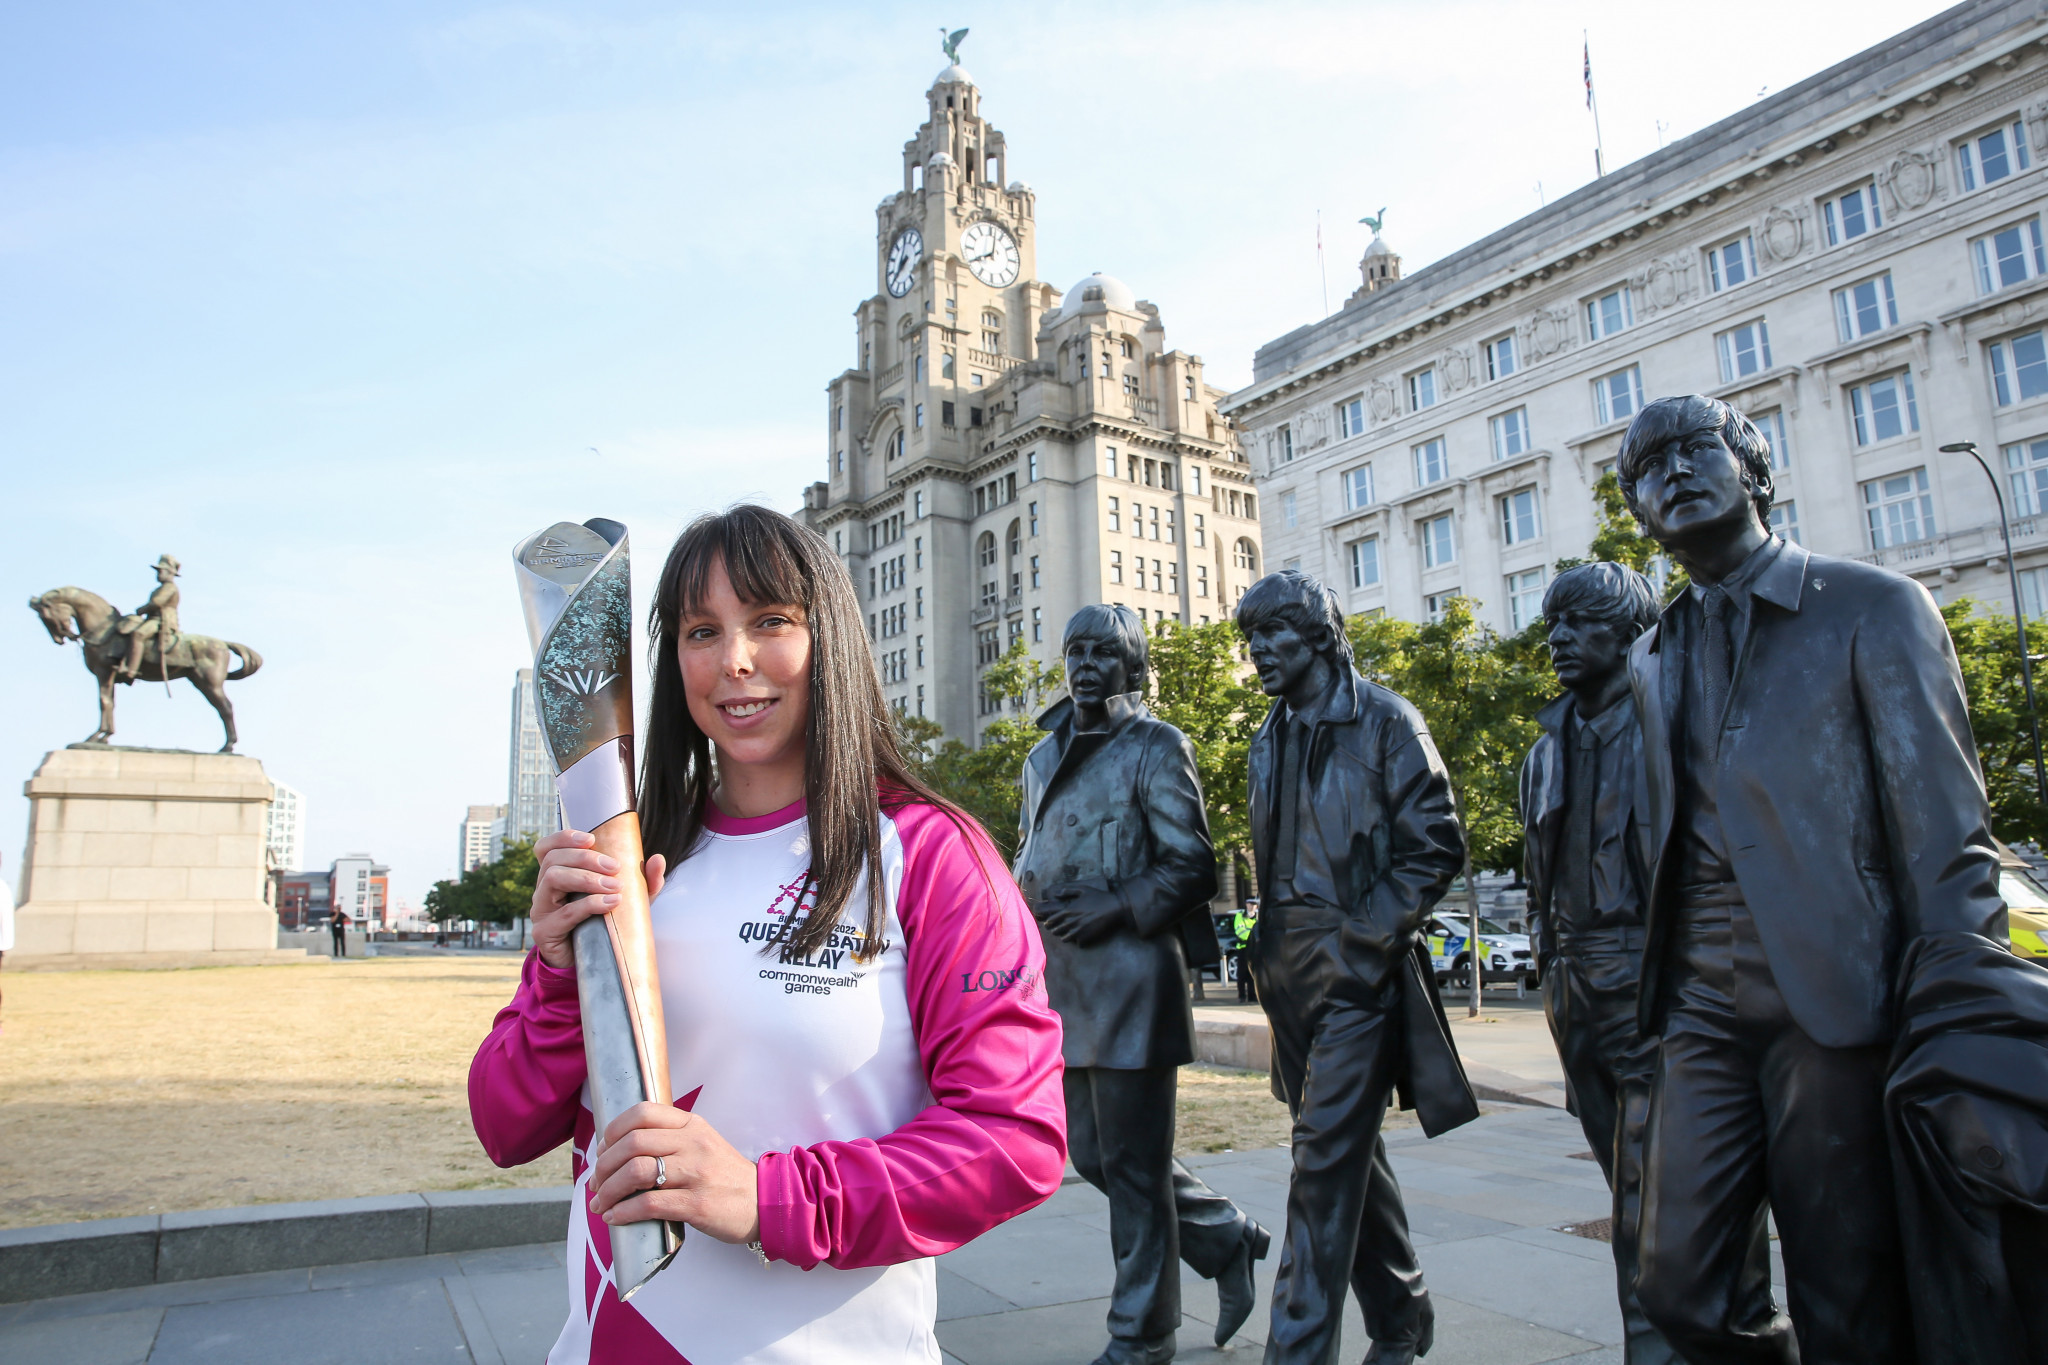 Statues of John Lennon, Paul McCartney, George Harrison and Ringo Starr watched over gymnast Beth Tweddle as she carried the Queen's Baton in Liverpool ©Getty Images